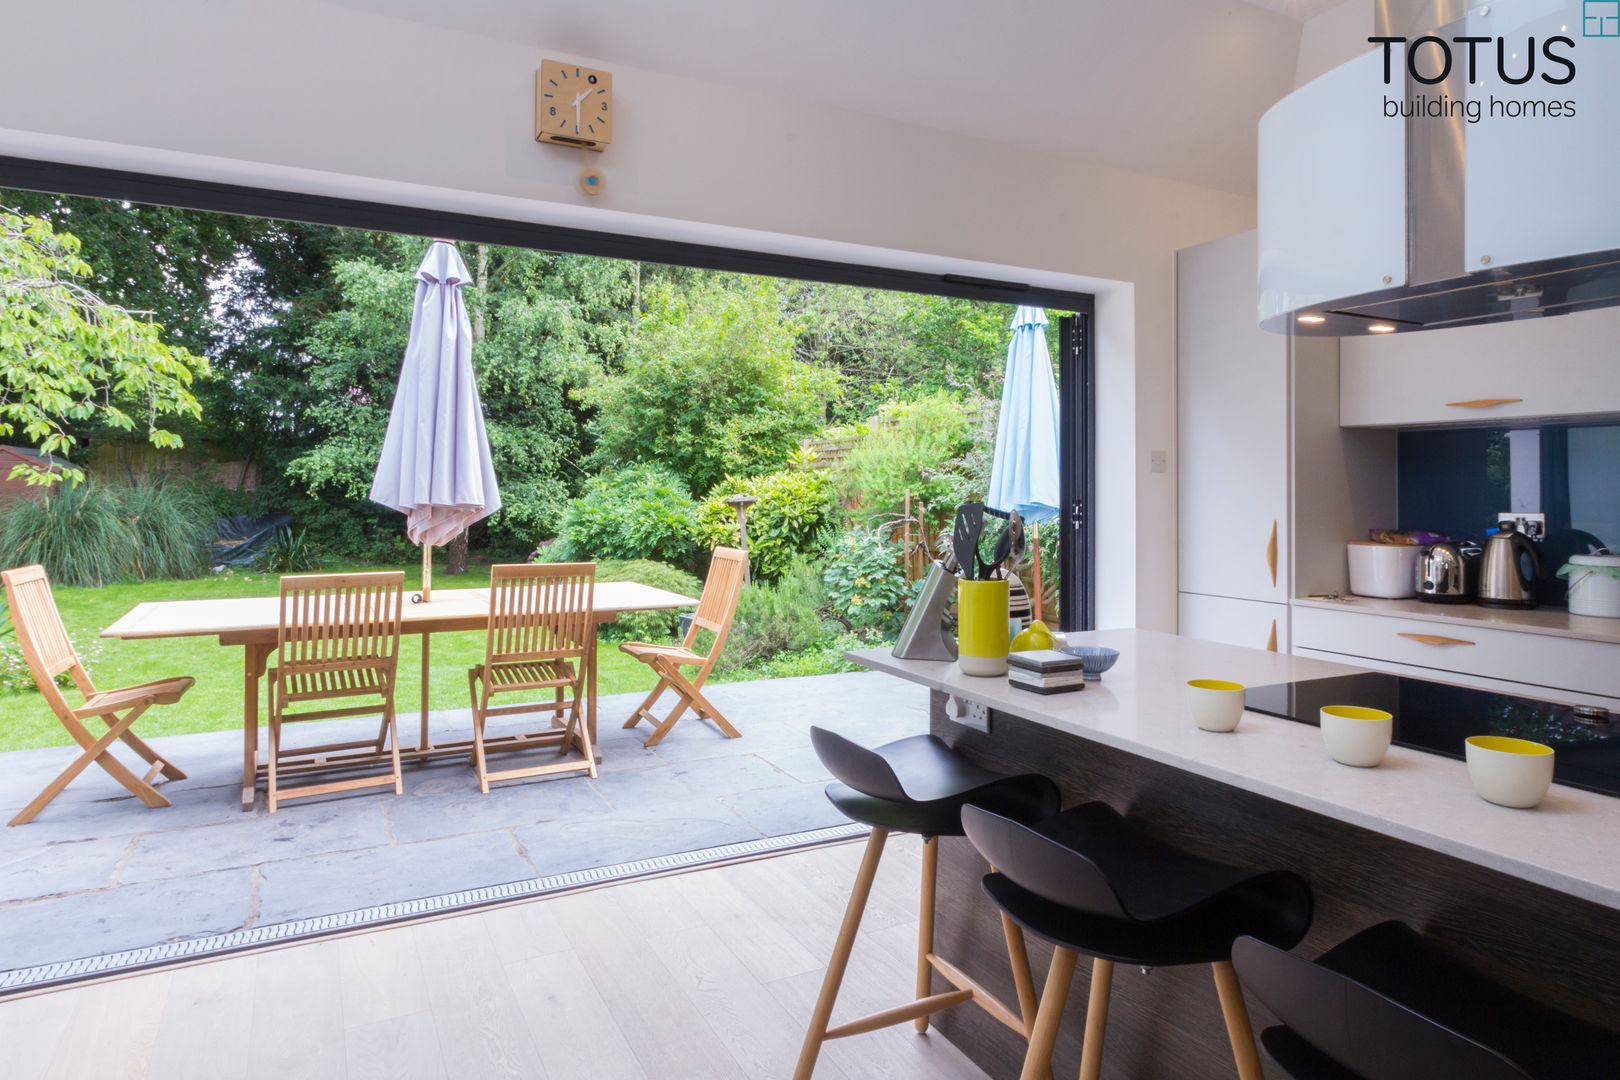 New life for a 1920s home - extension and full renovation, Thames Ditton, Surrey, TOTUS TOTUS Kitchen